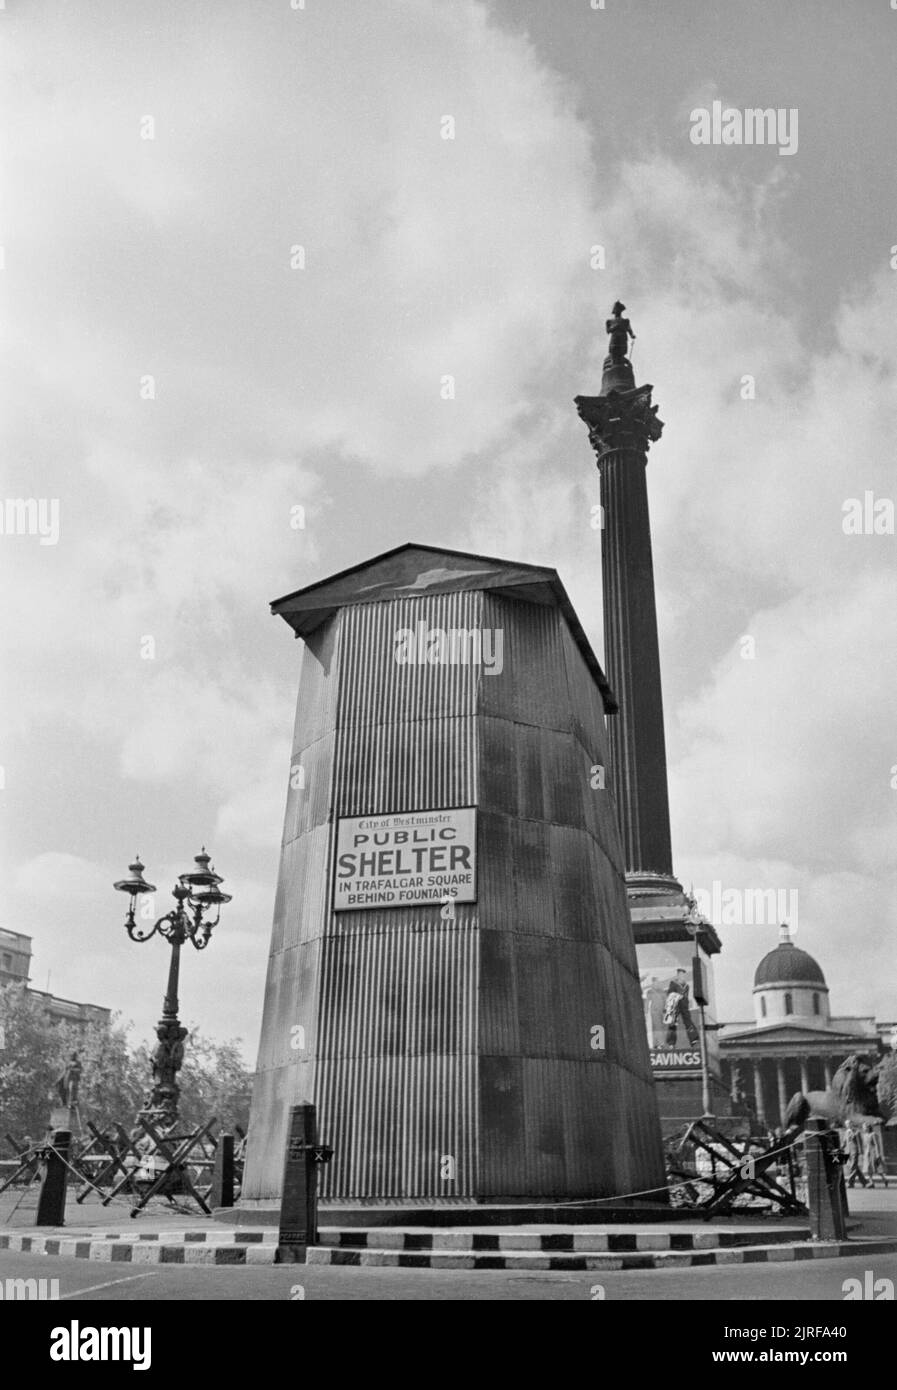 Air Raid Precautions in Central London, England, UK, 1941 A view of the King Charles I statue in Whitehall, showing the precautions taken to protect it from damage by air raids. The statue itself has been covered in a timber frame, sandbagged and then covered in corrugated iron. Clearly visible is a sign which directs people to the public air raid shelter in Trafalgar Square. Stock Photo